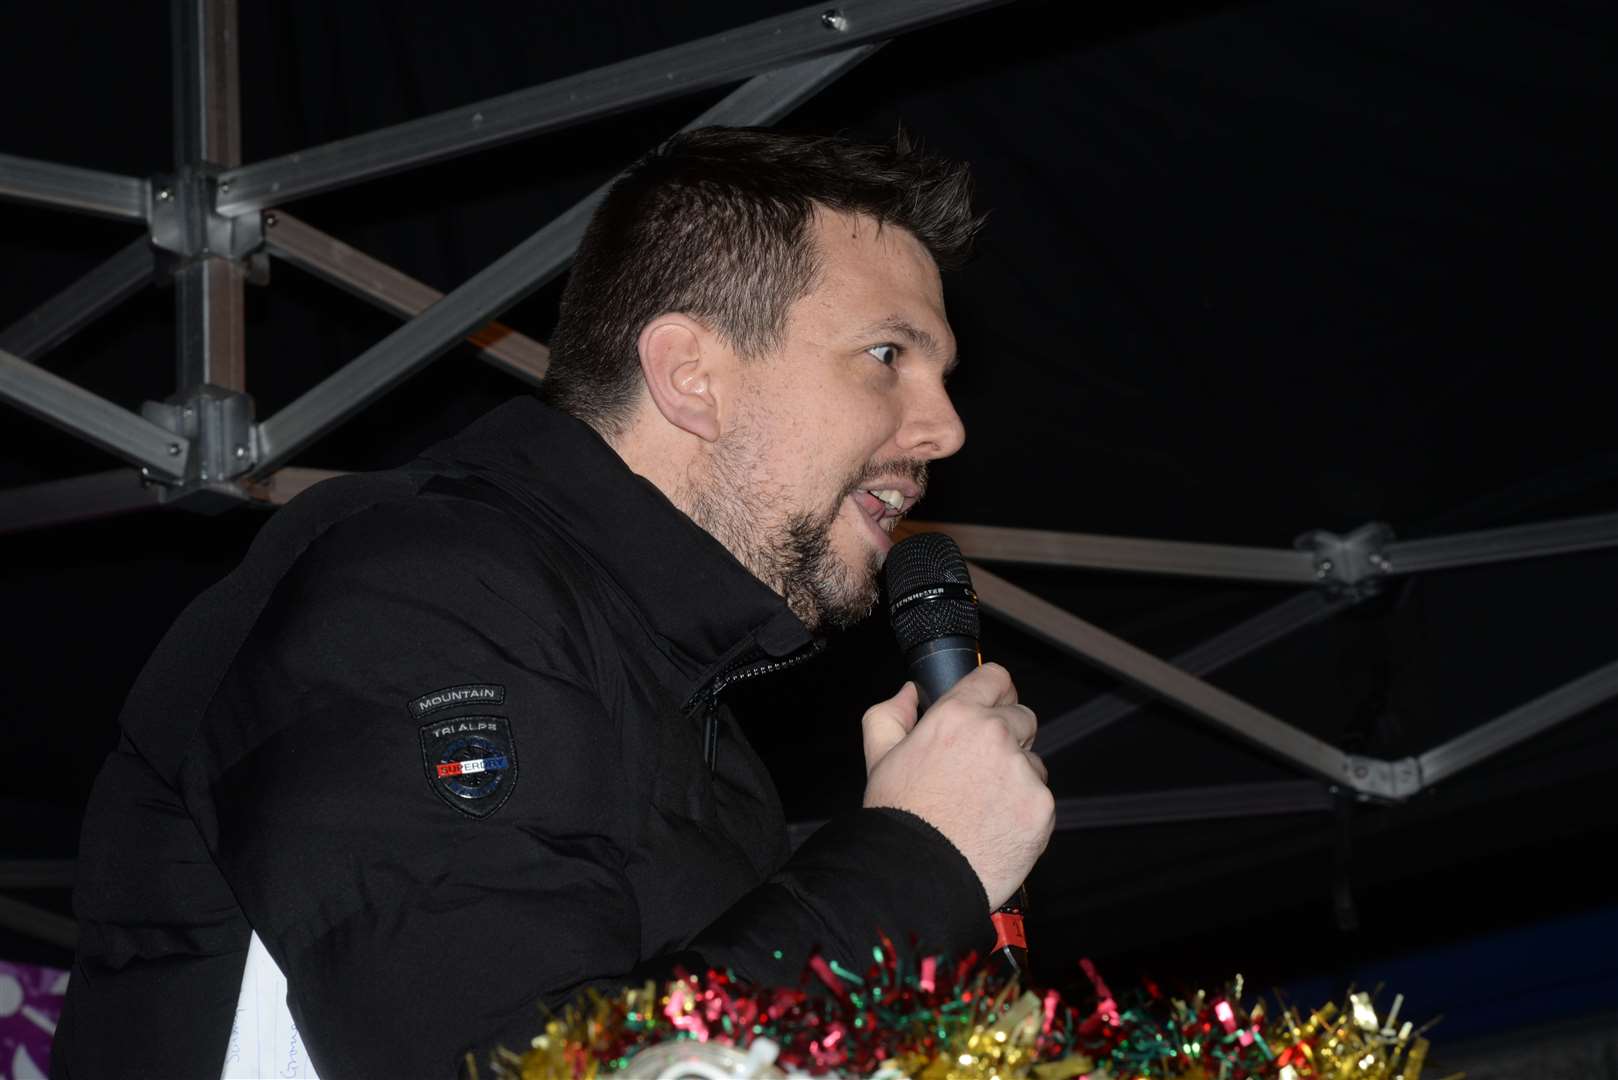 Kmfm's Rob Wills at the Chatham Christmas lights switch-on. Picture: Chris Davey